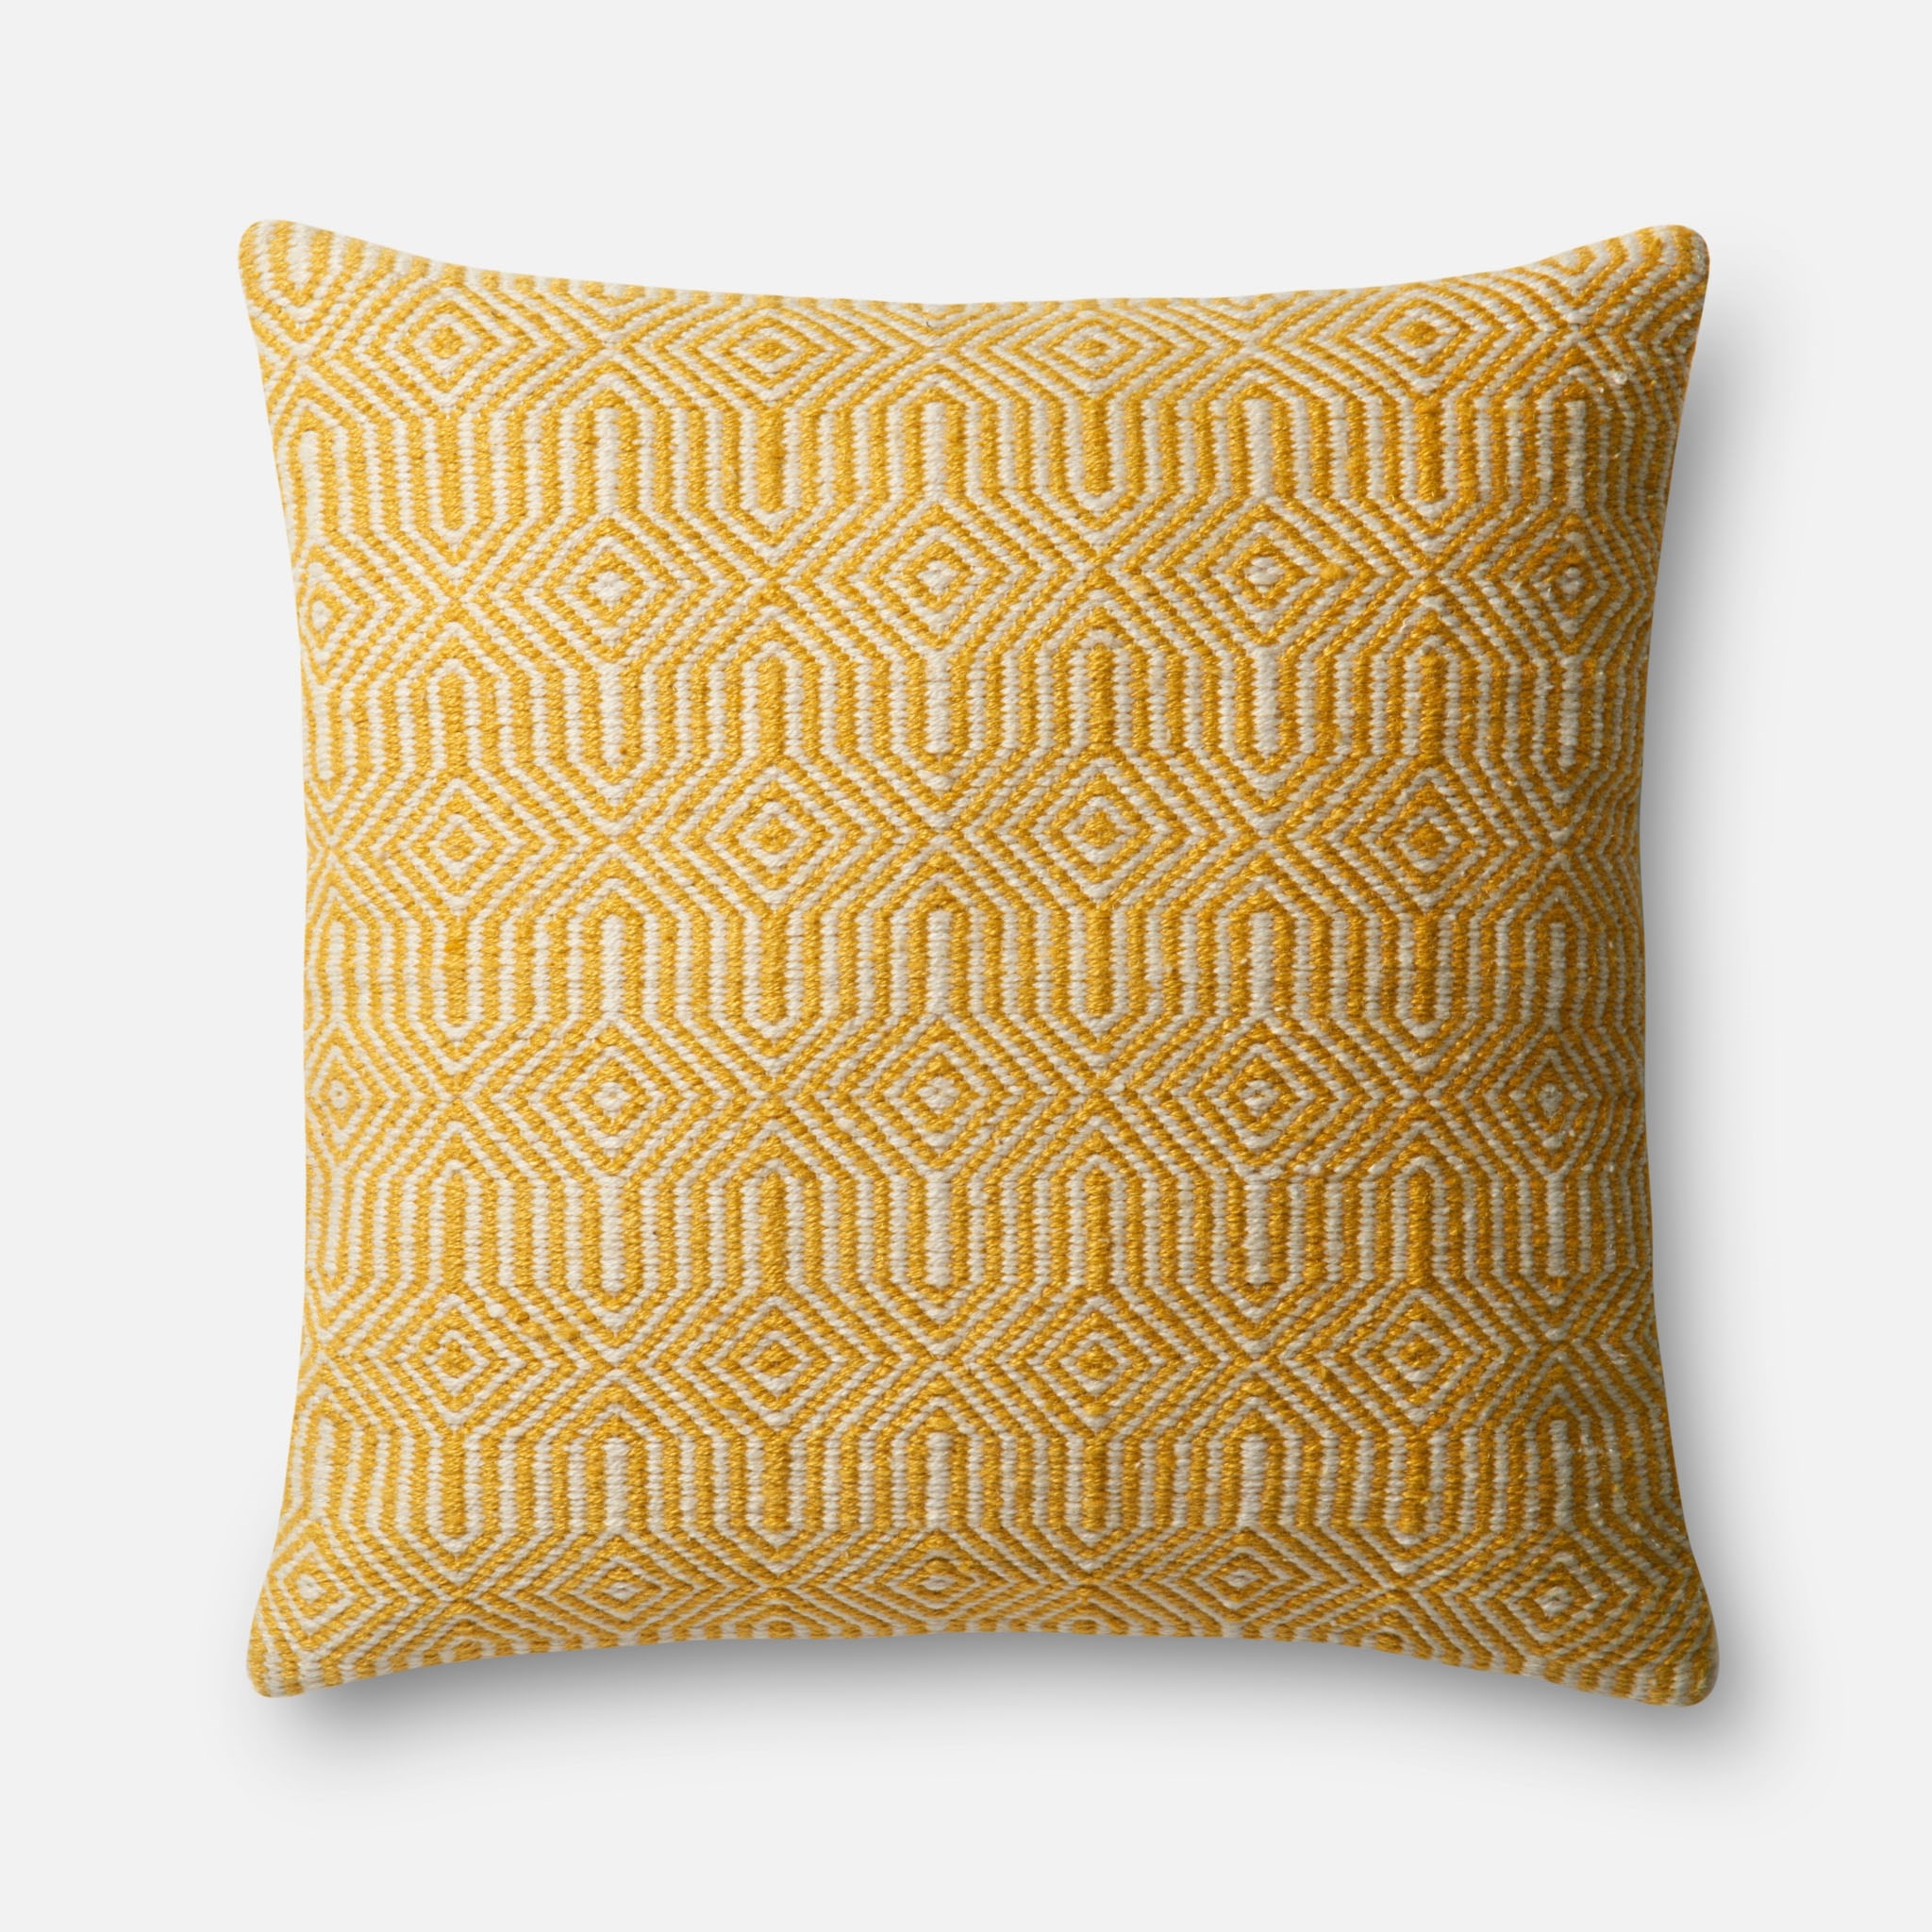 Patterned Indoor/Outdoor Throw Pillow Cover, Yellow & Ivory, 22" x 22" - Image 0